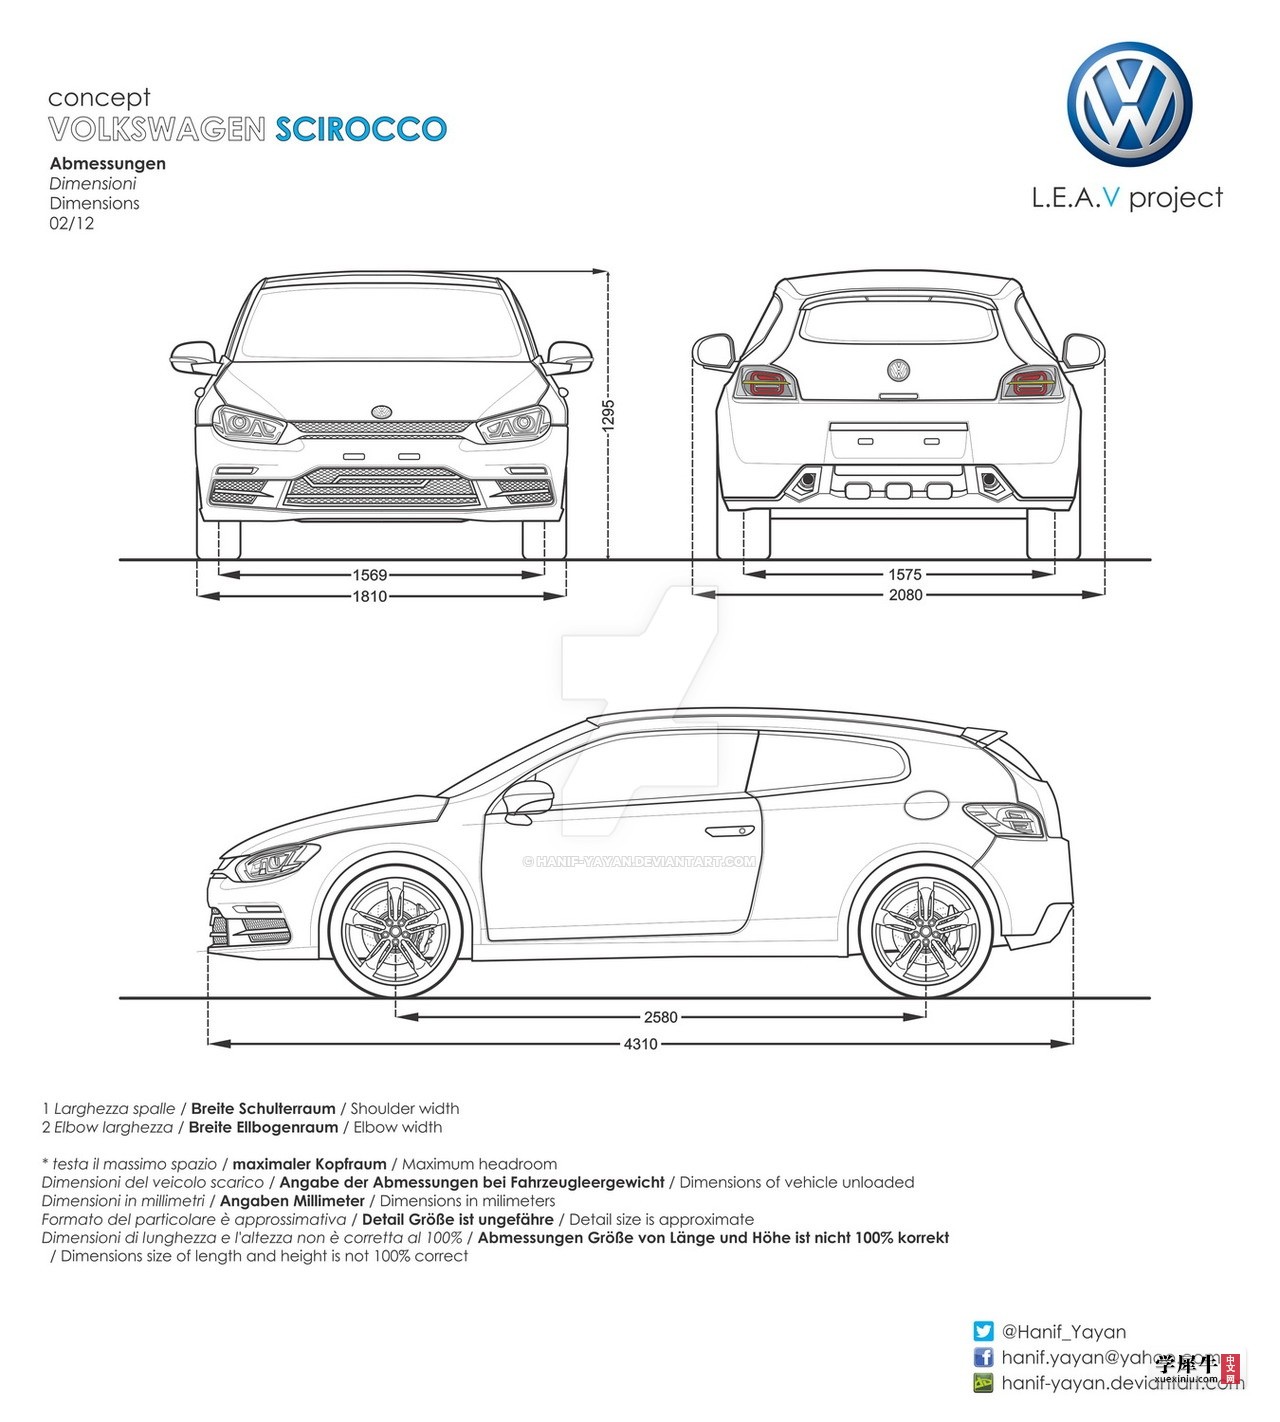 l_e_a_v_project_volkswagen_e_scirocco_by_hanif_yayan-d7ruqrd.jpg